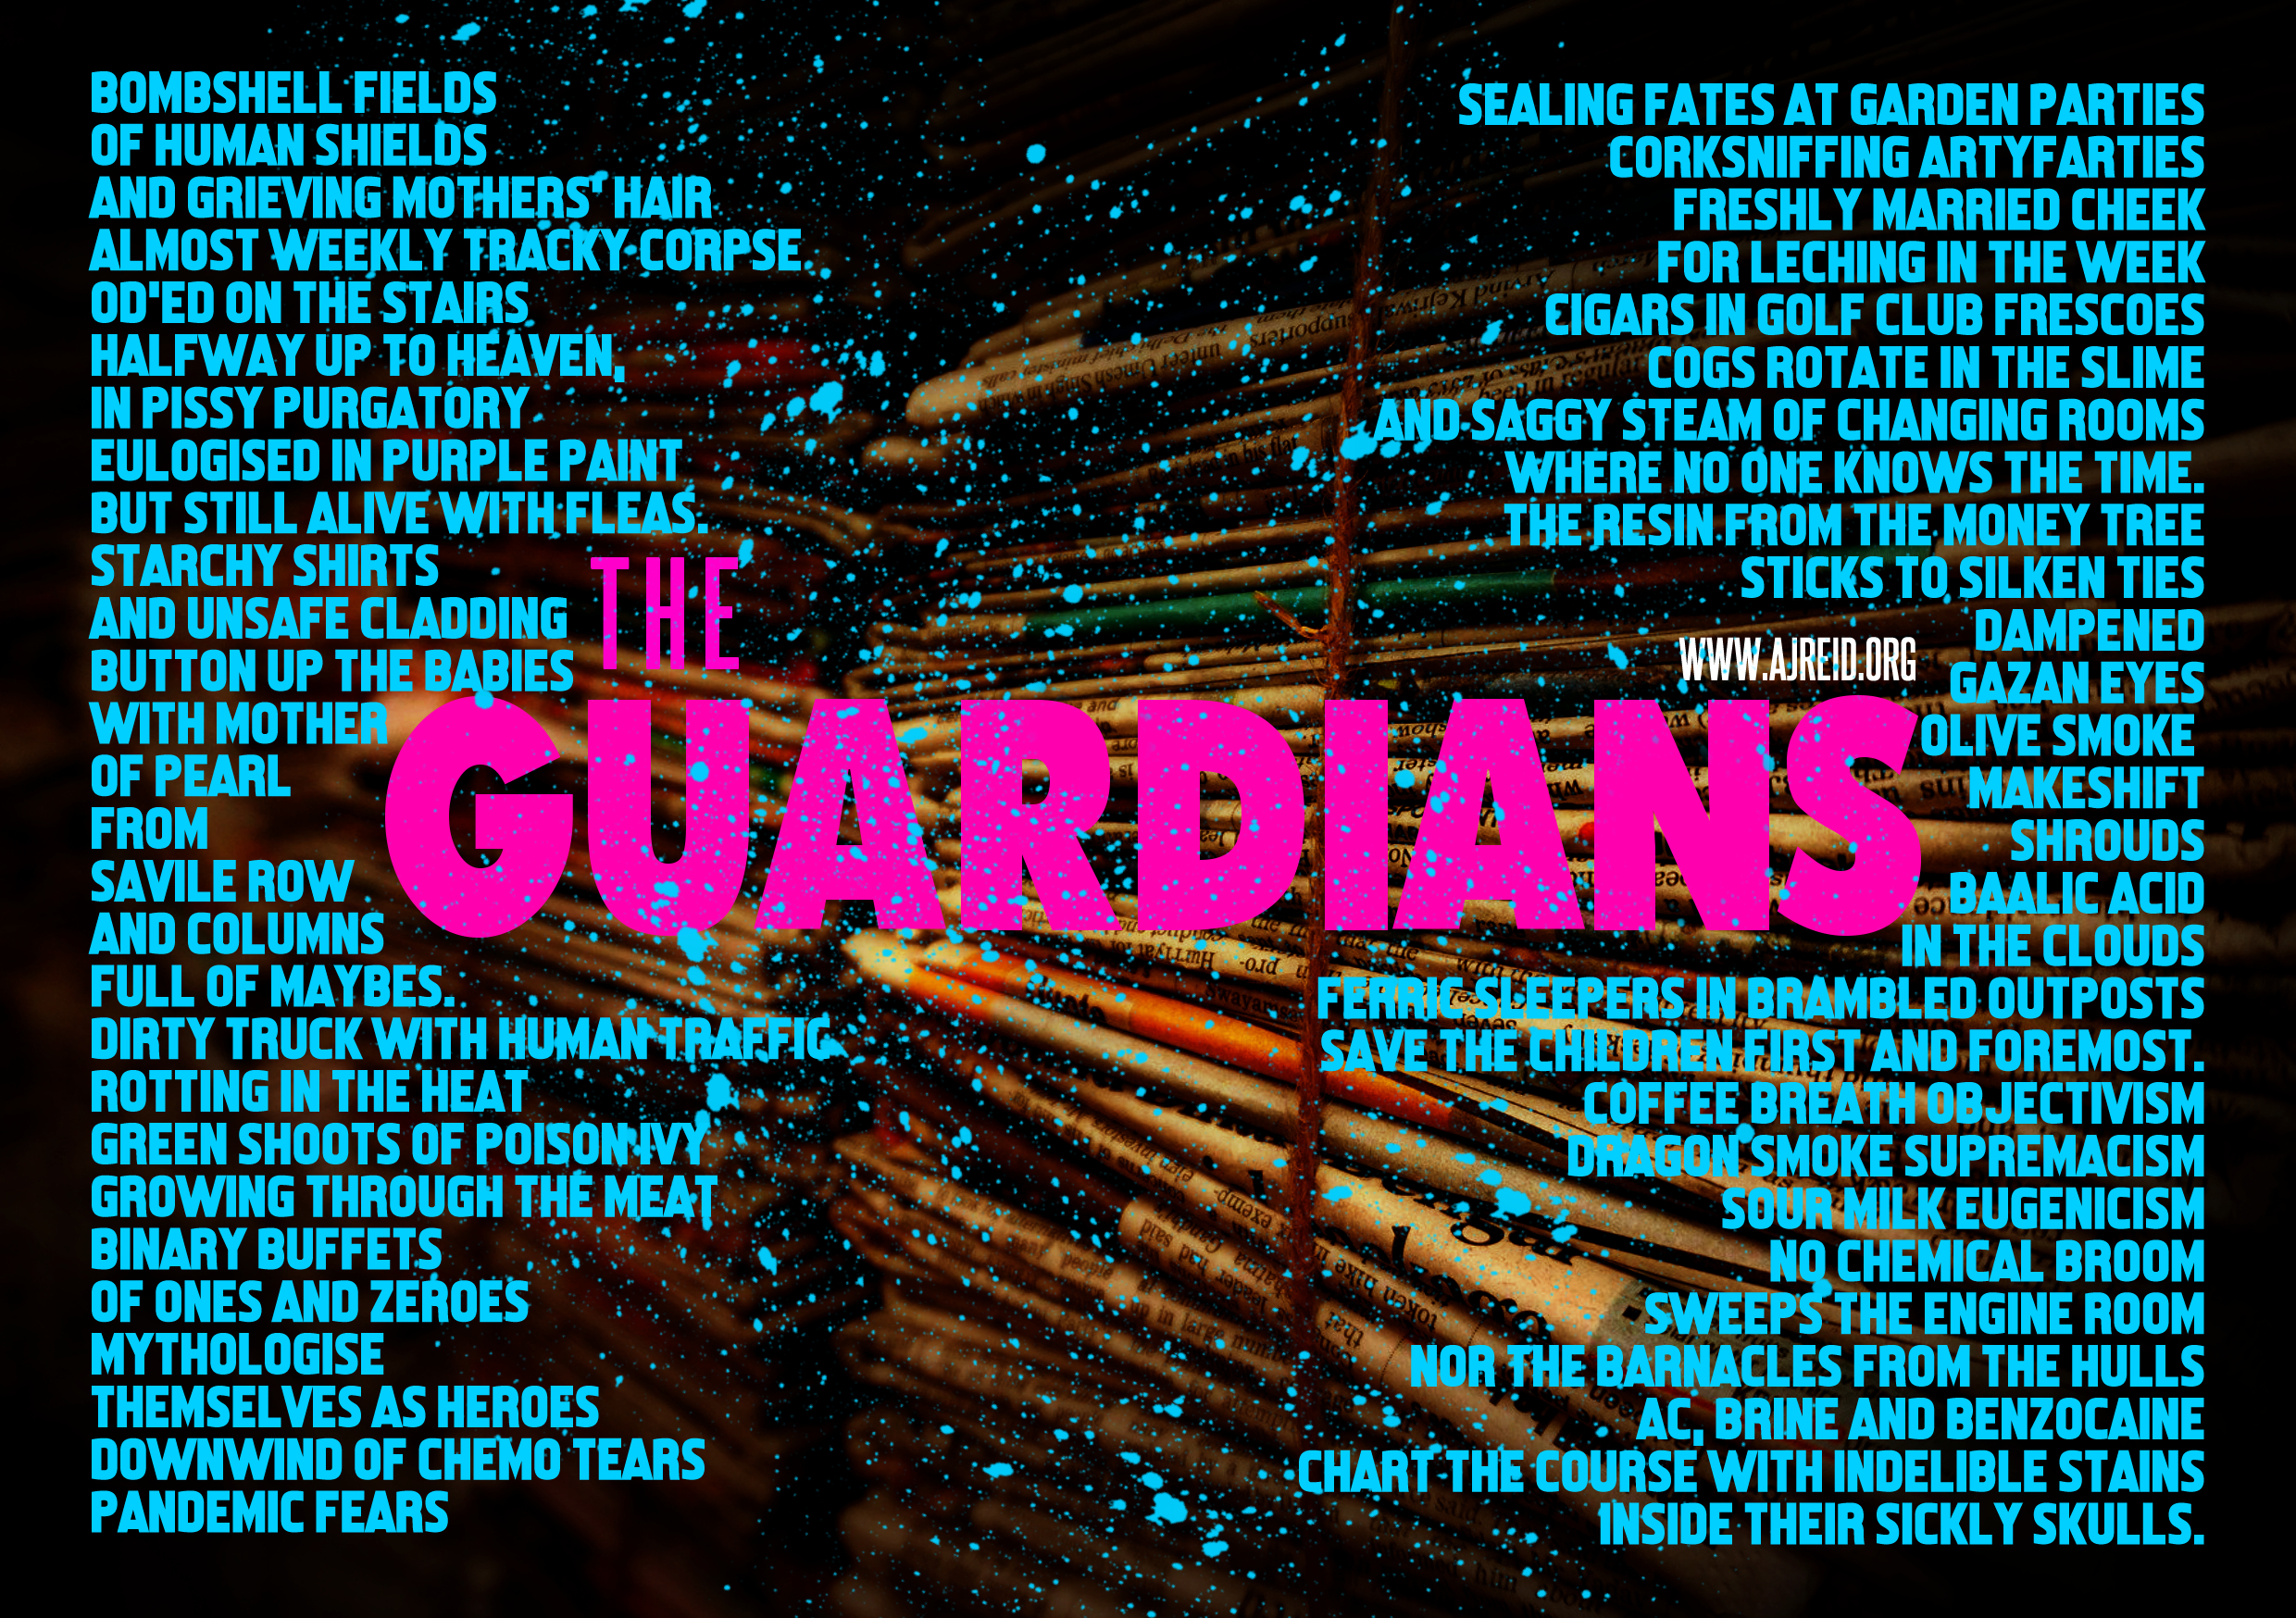 Protected: The Guardians